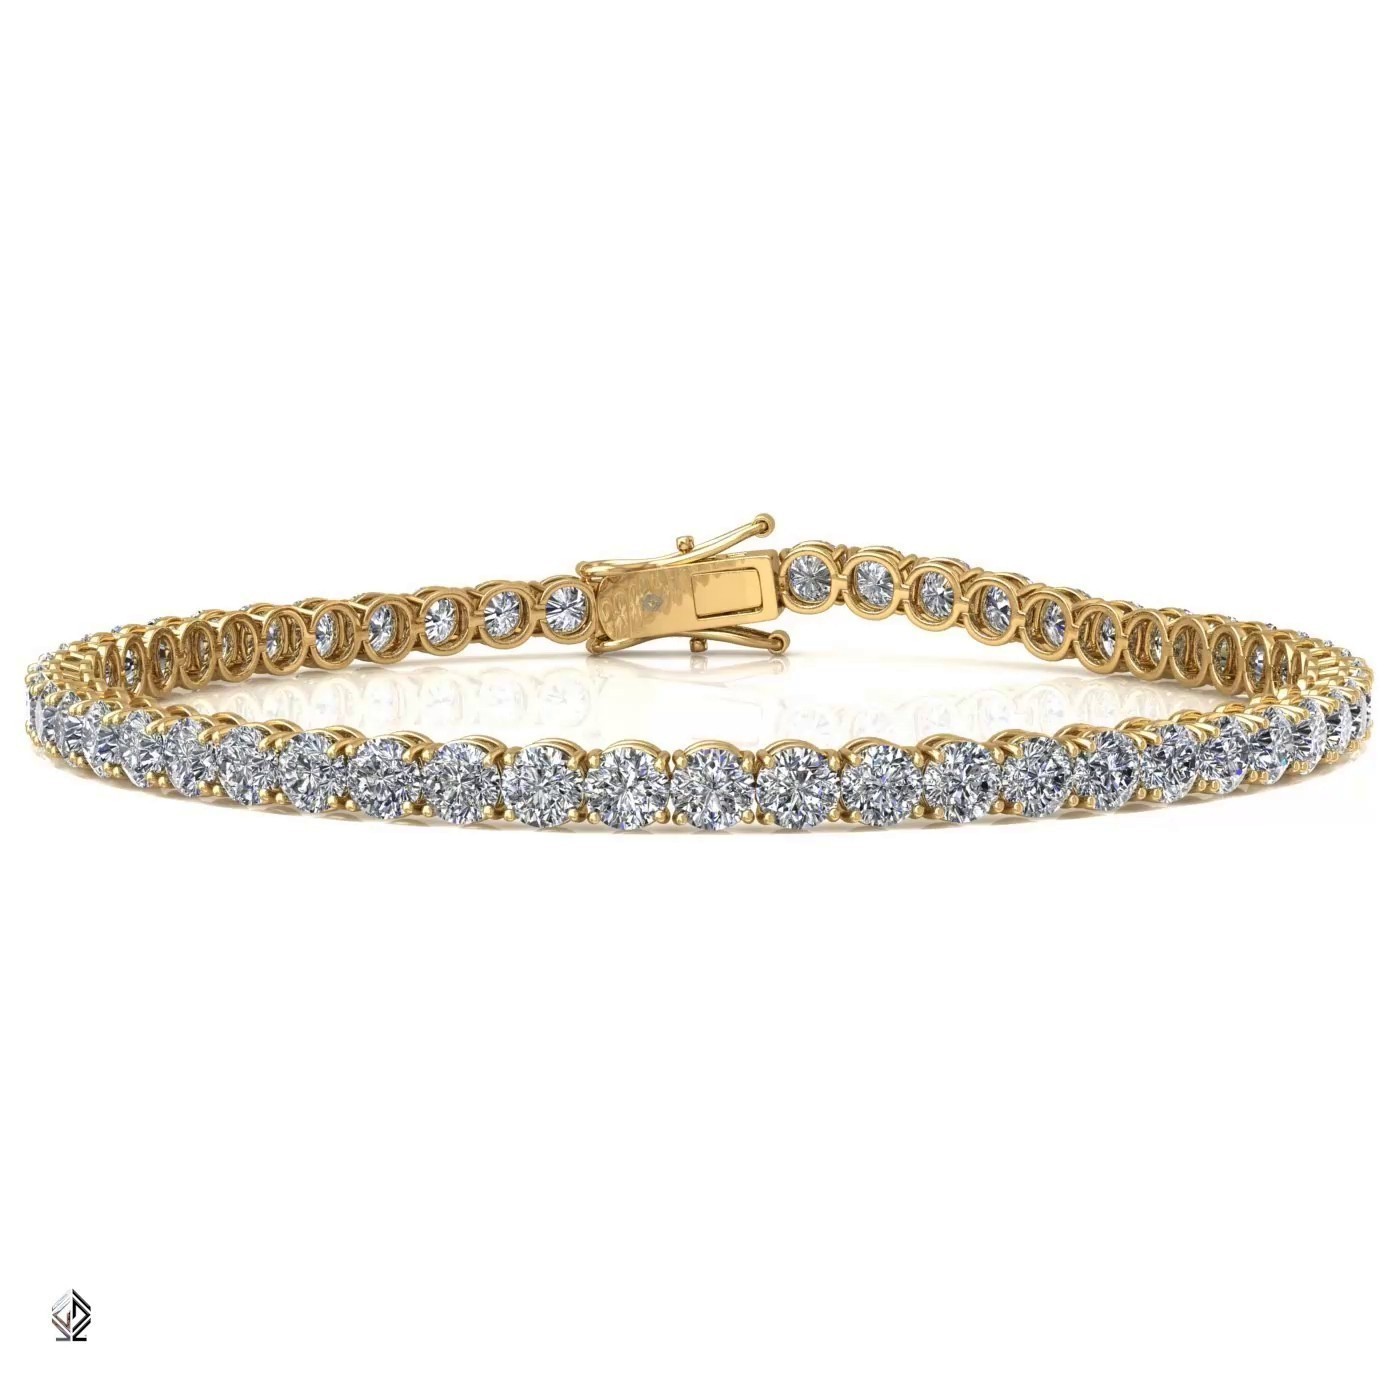 18k yellow gold 3.3mm 4 prong round shape diamond tennis bracelet in round setting Photos & images